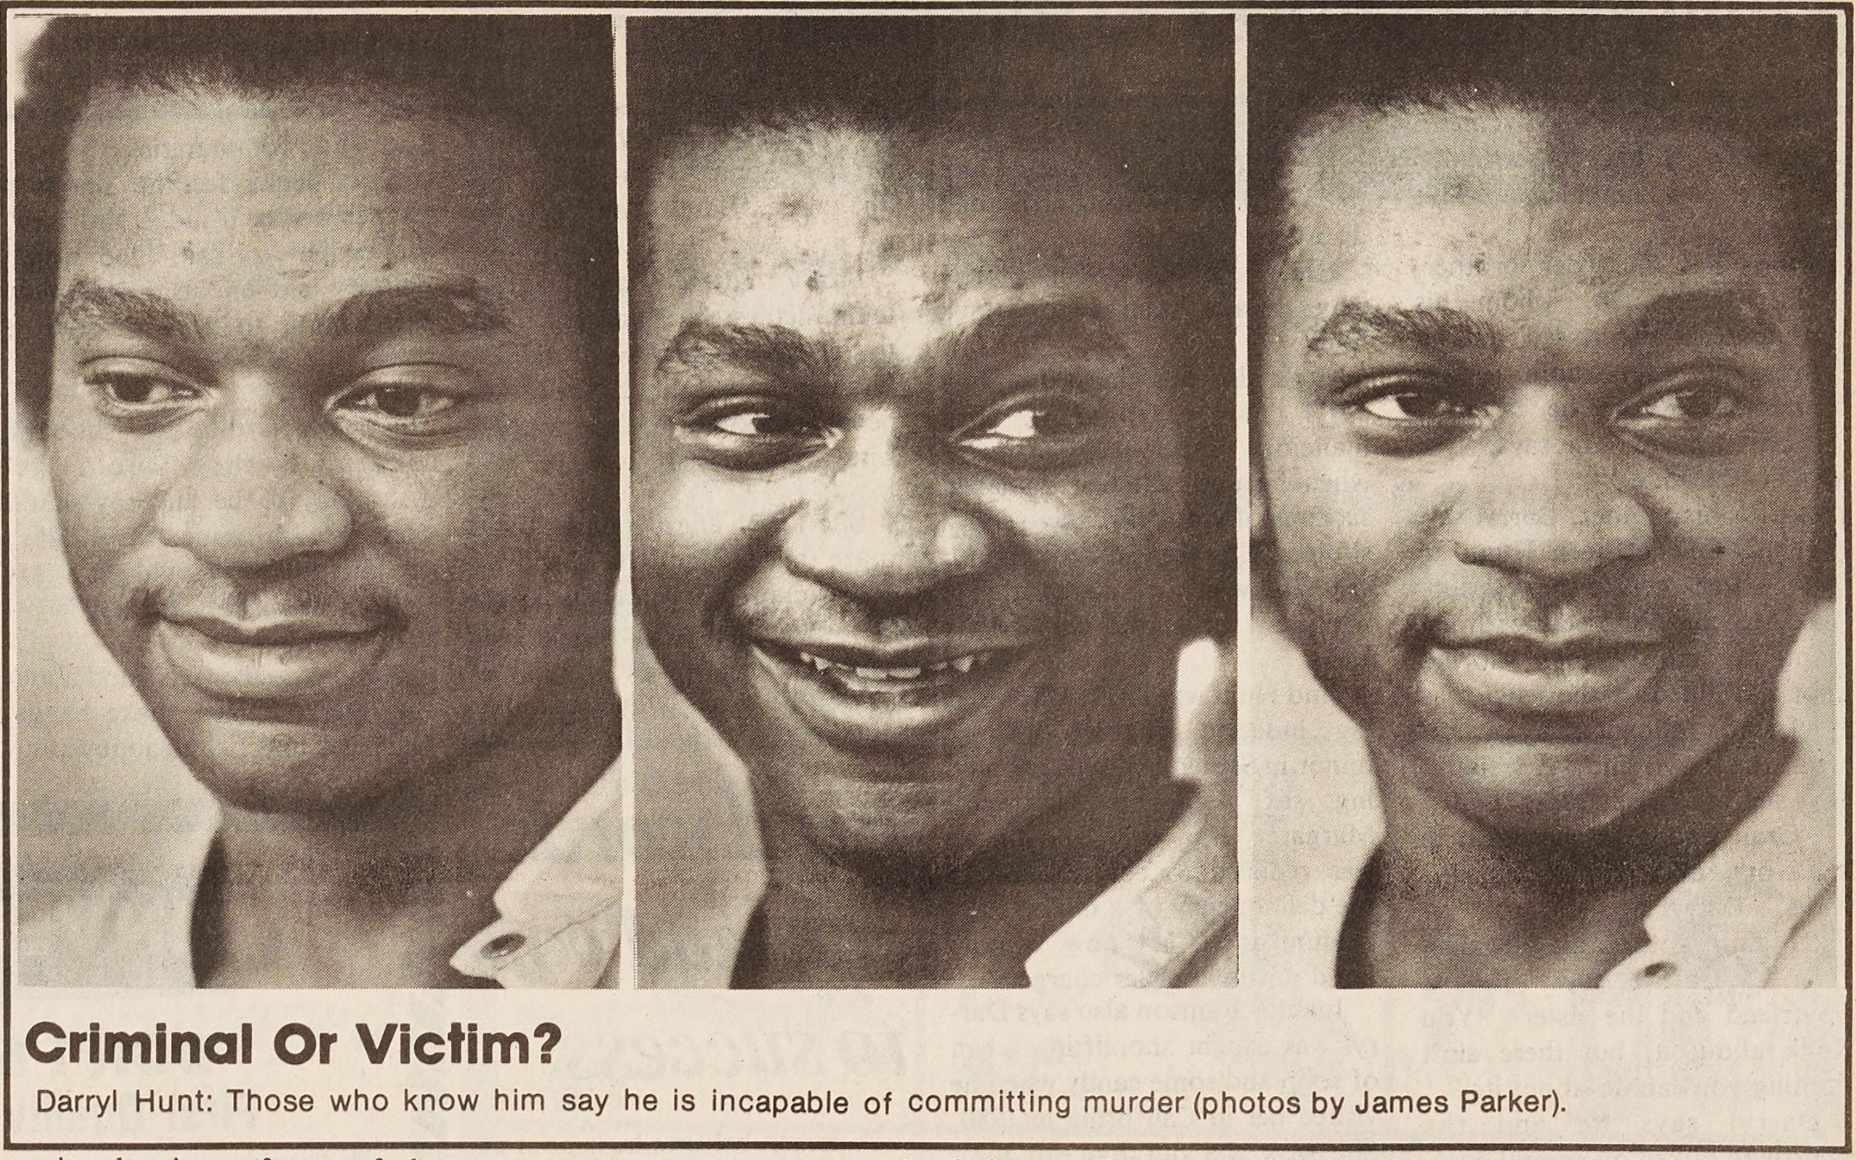 Three different photographs of a Black man named Darryl Hunt. In the left and right photos he looks thoughtful and in the middle photo he is smiling